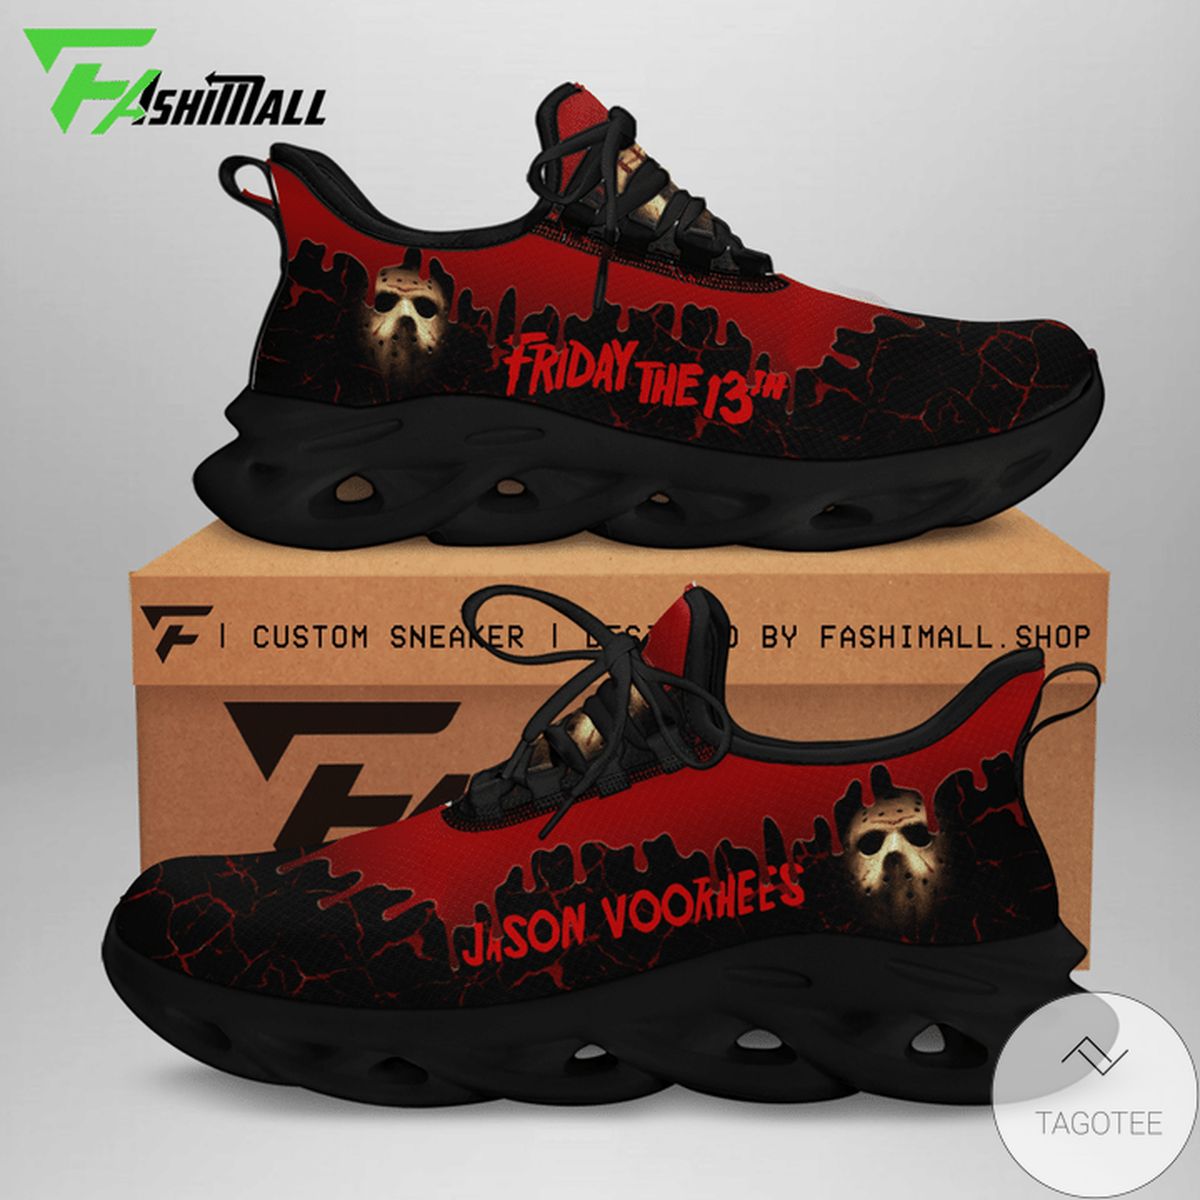 Jason Voorhees Friday The 13th Max Soul Shoes